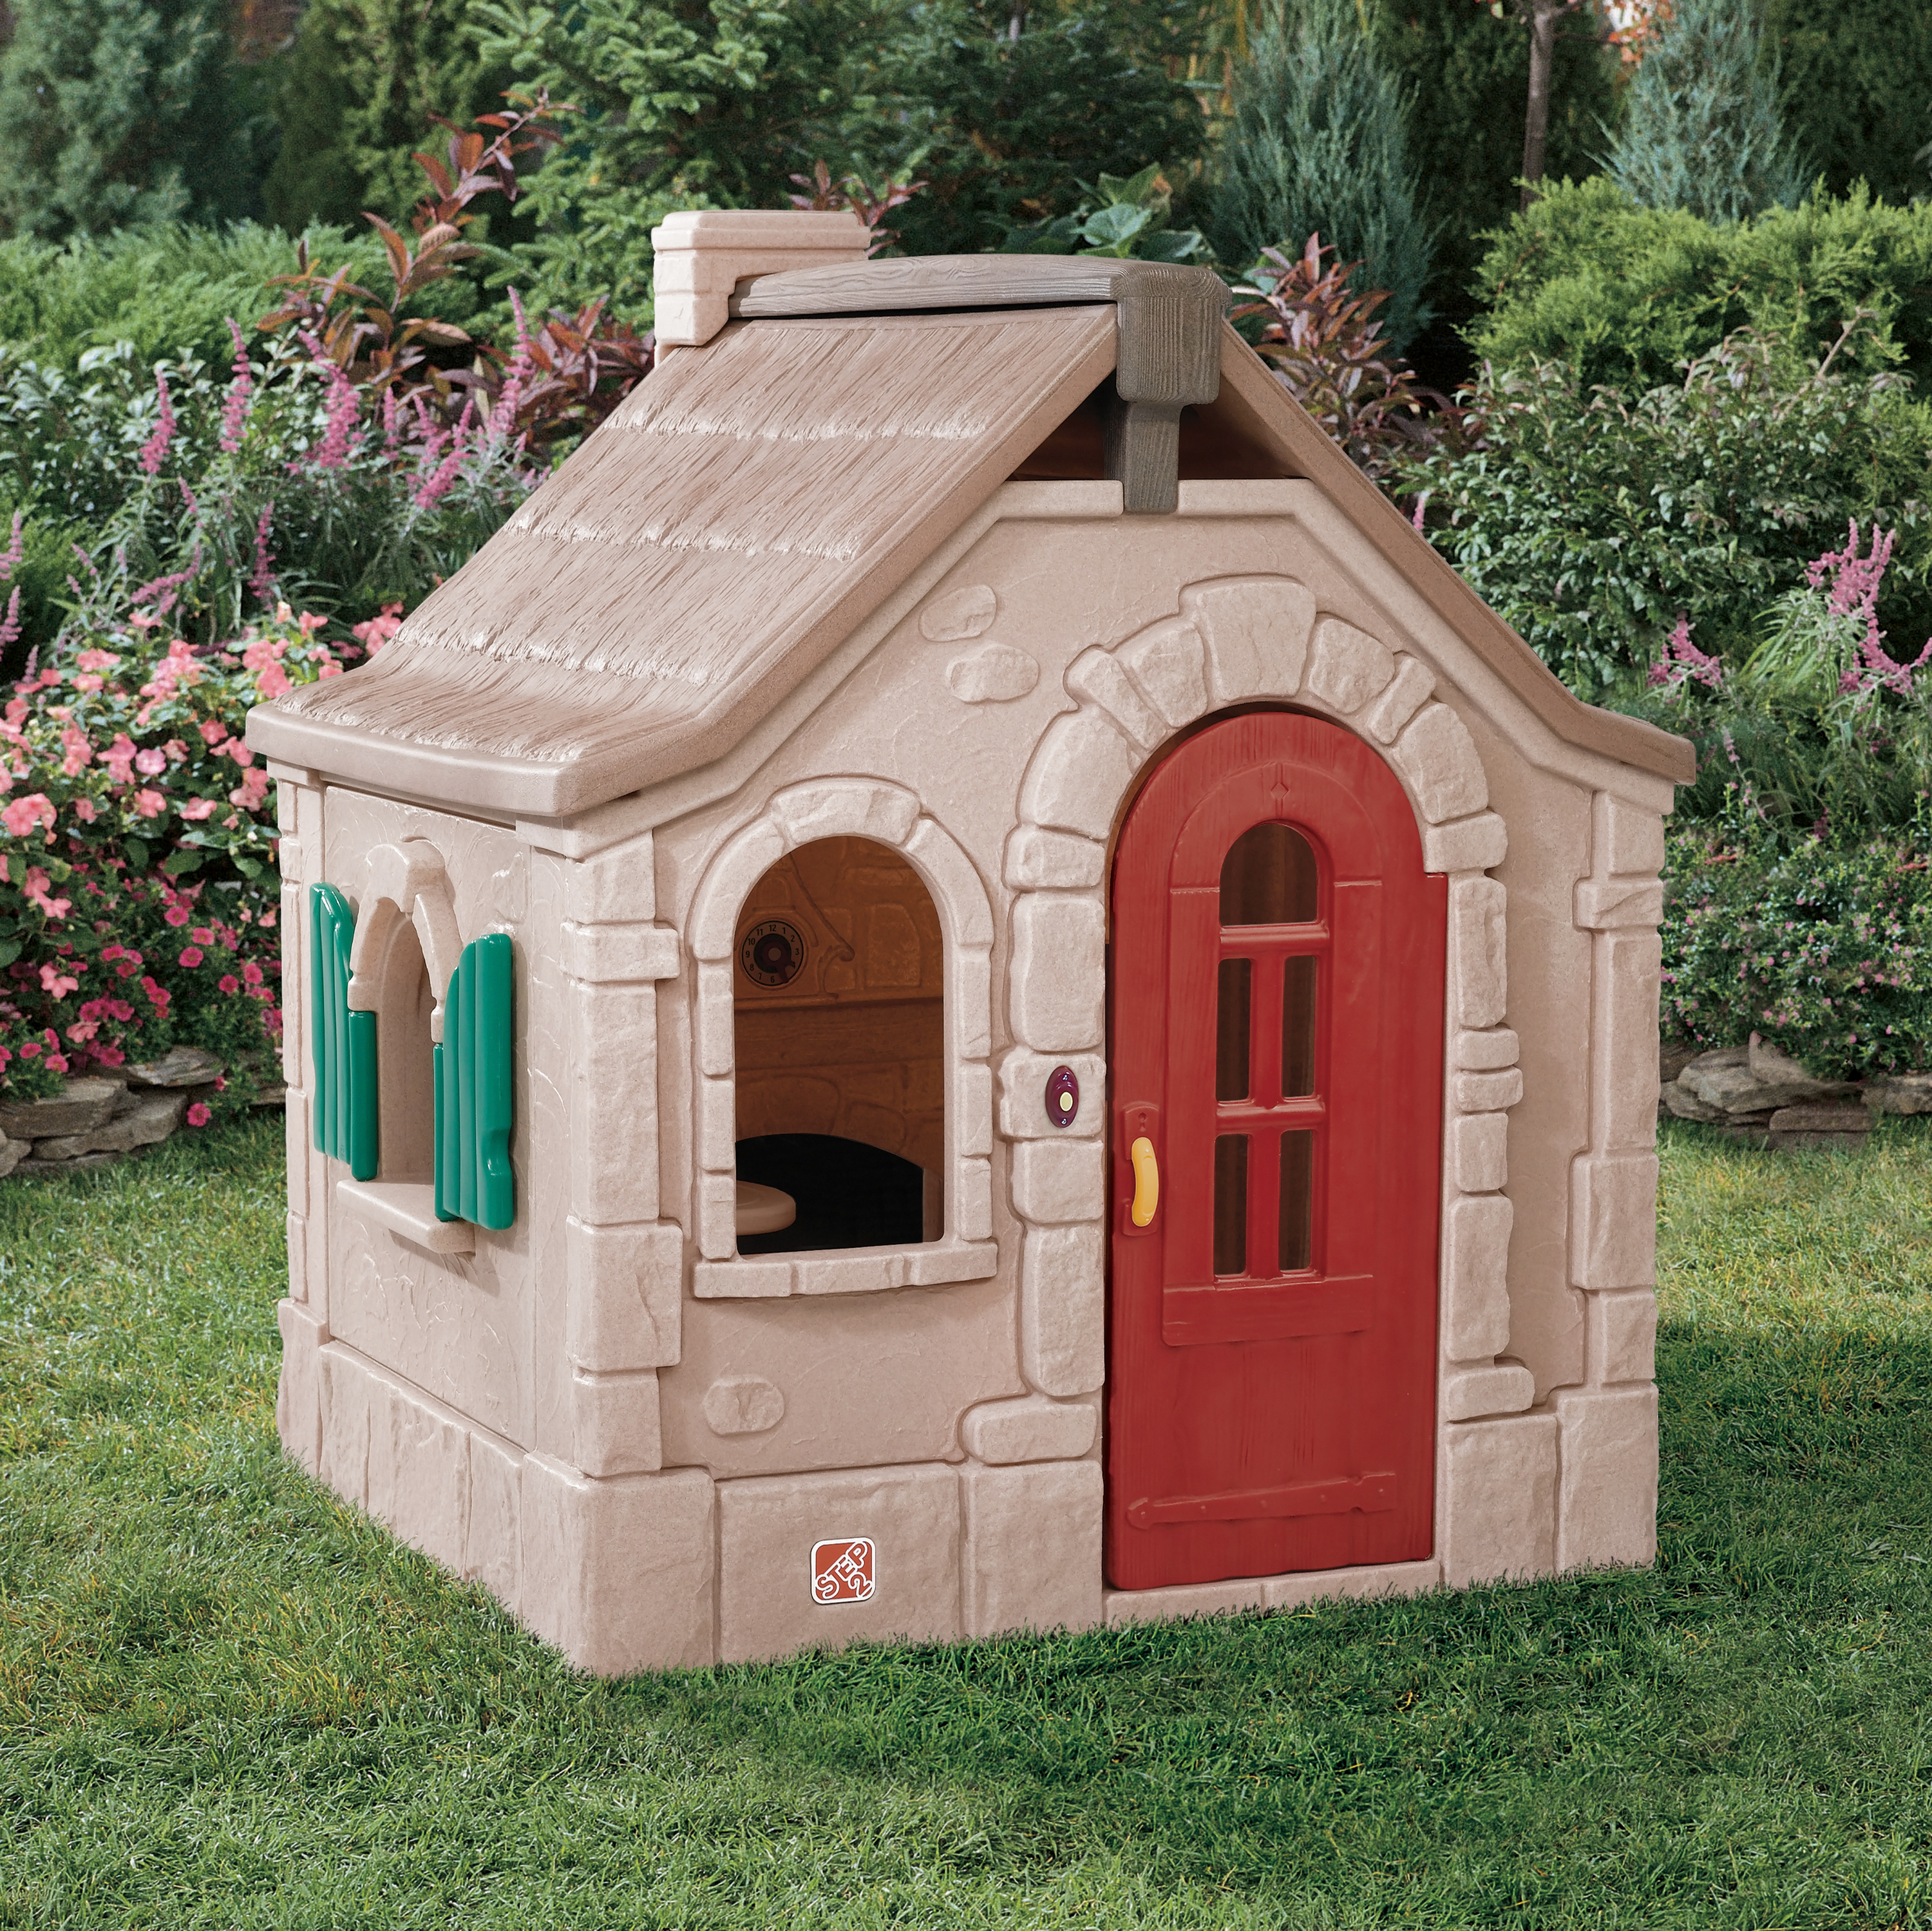 Step2 Naturally Playful Storybook Brown Cottage Playhouse Plastic Kids Outdoor Toy - image 4 of 5